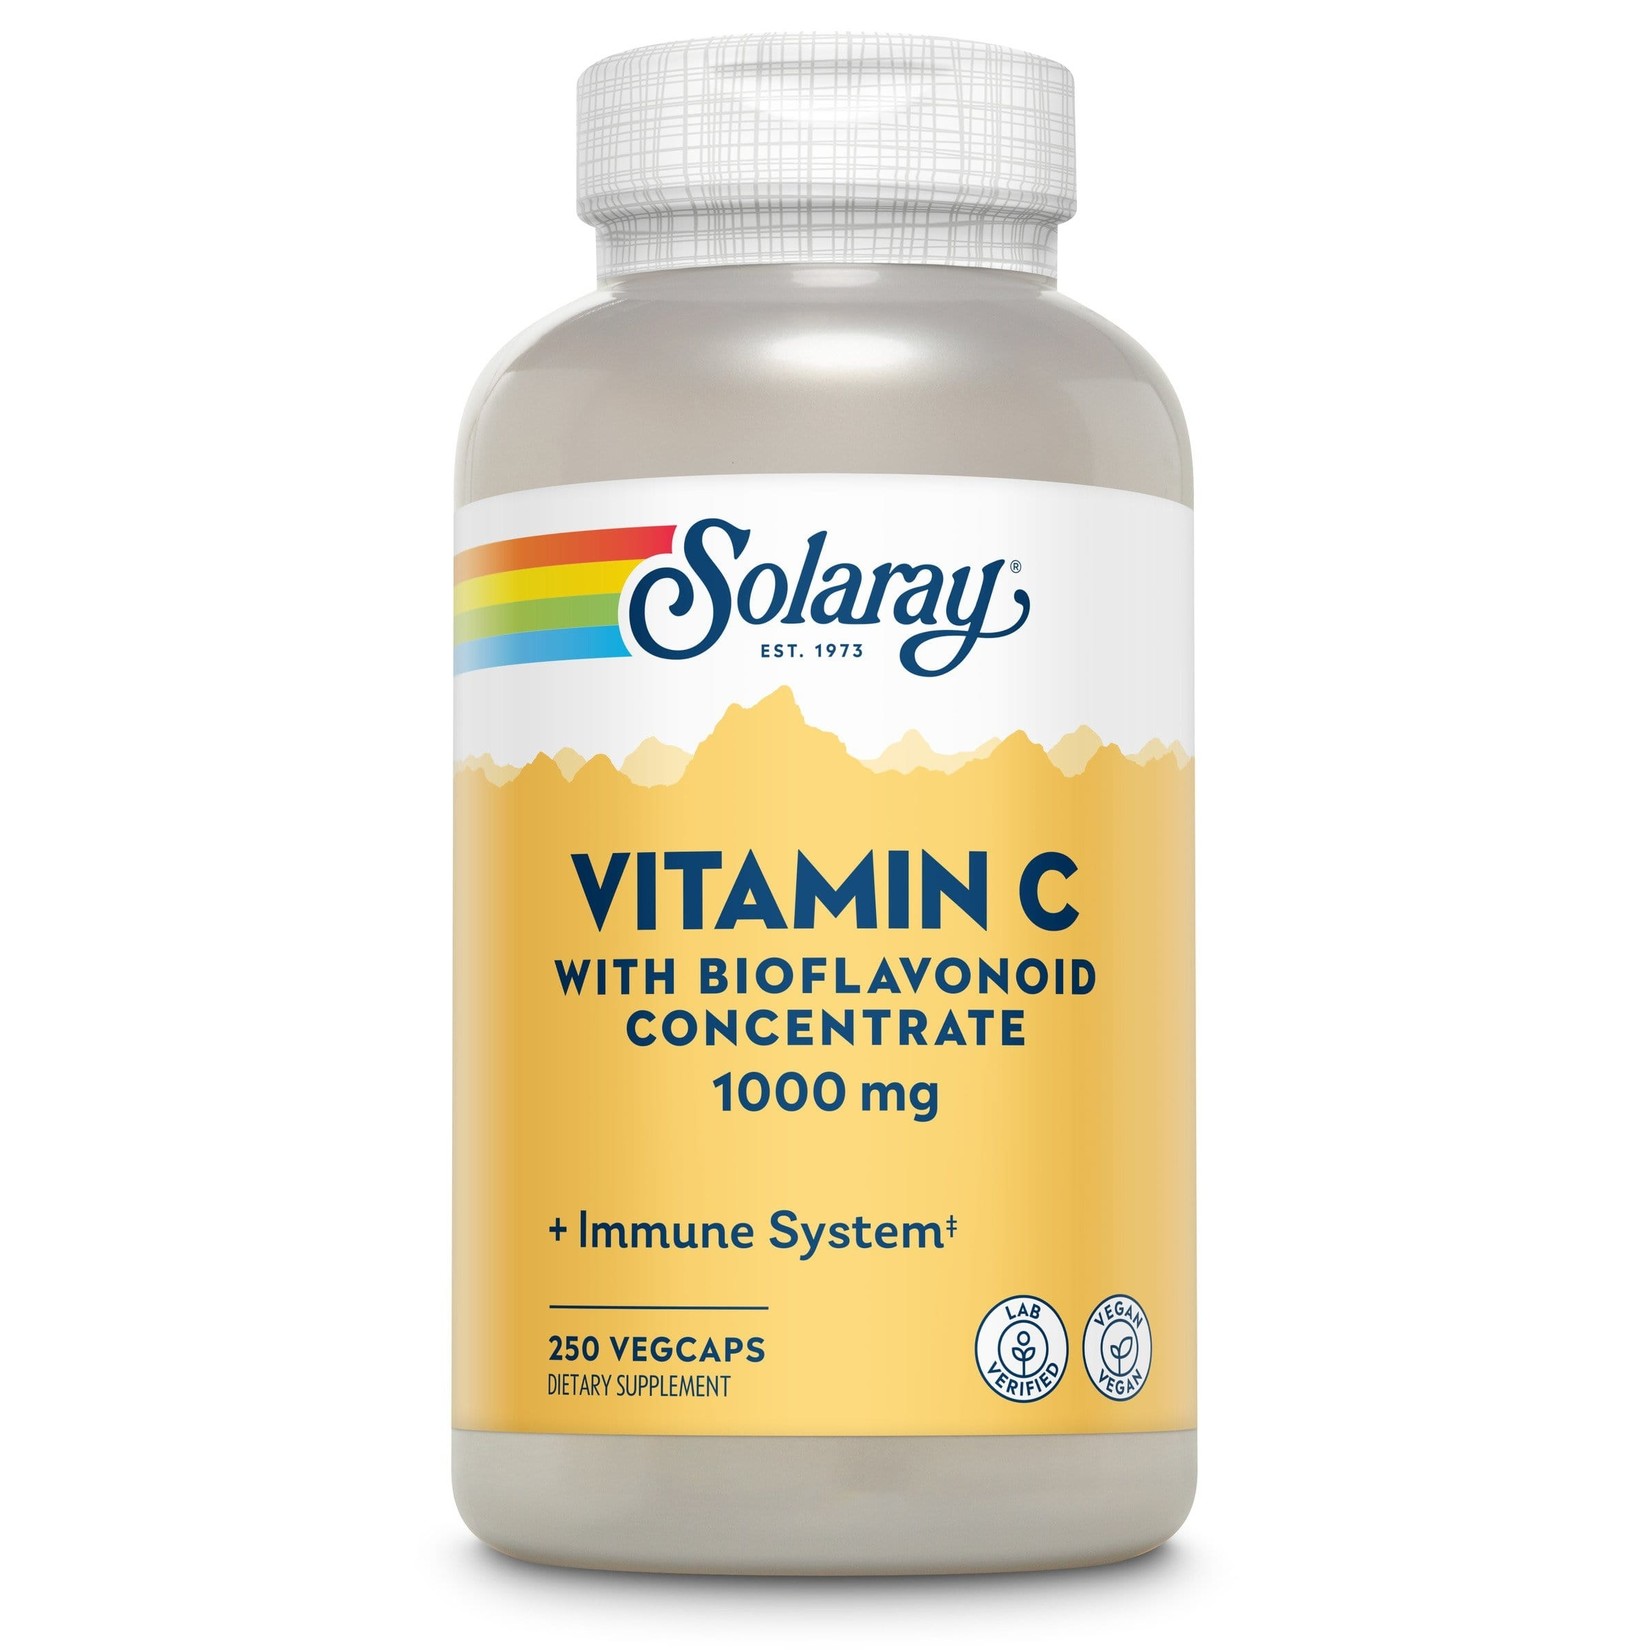 Solaray Solaray - Vitamin C With Bioflavonoid Concentrate 1000 mg - 250 count